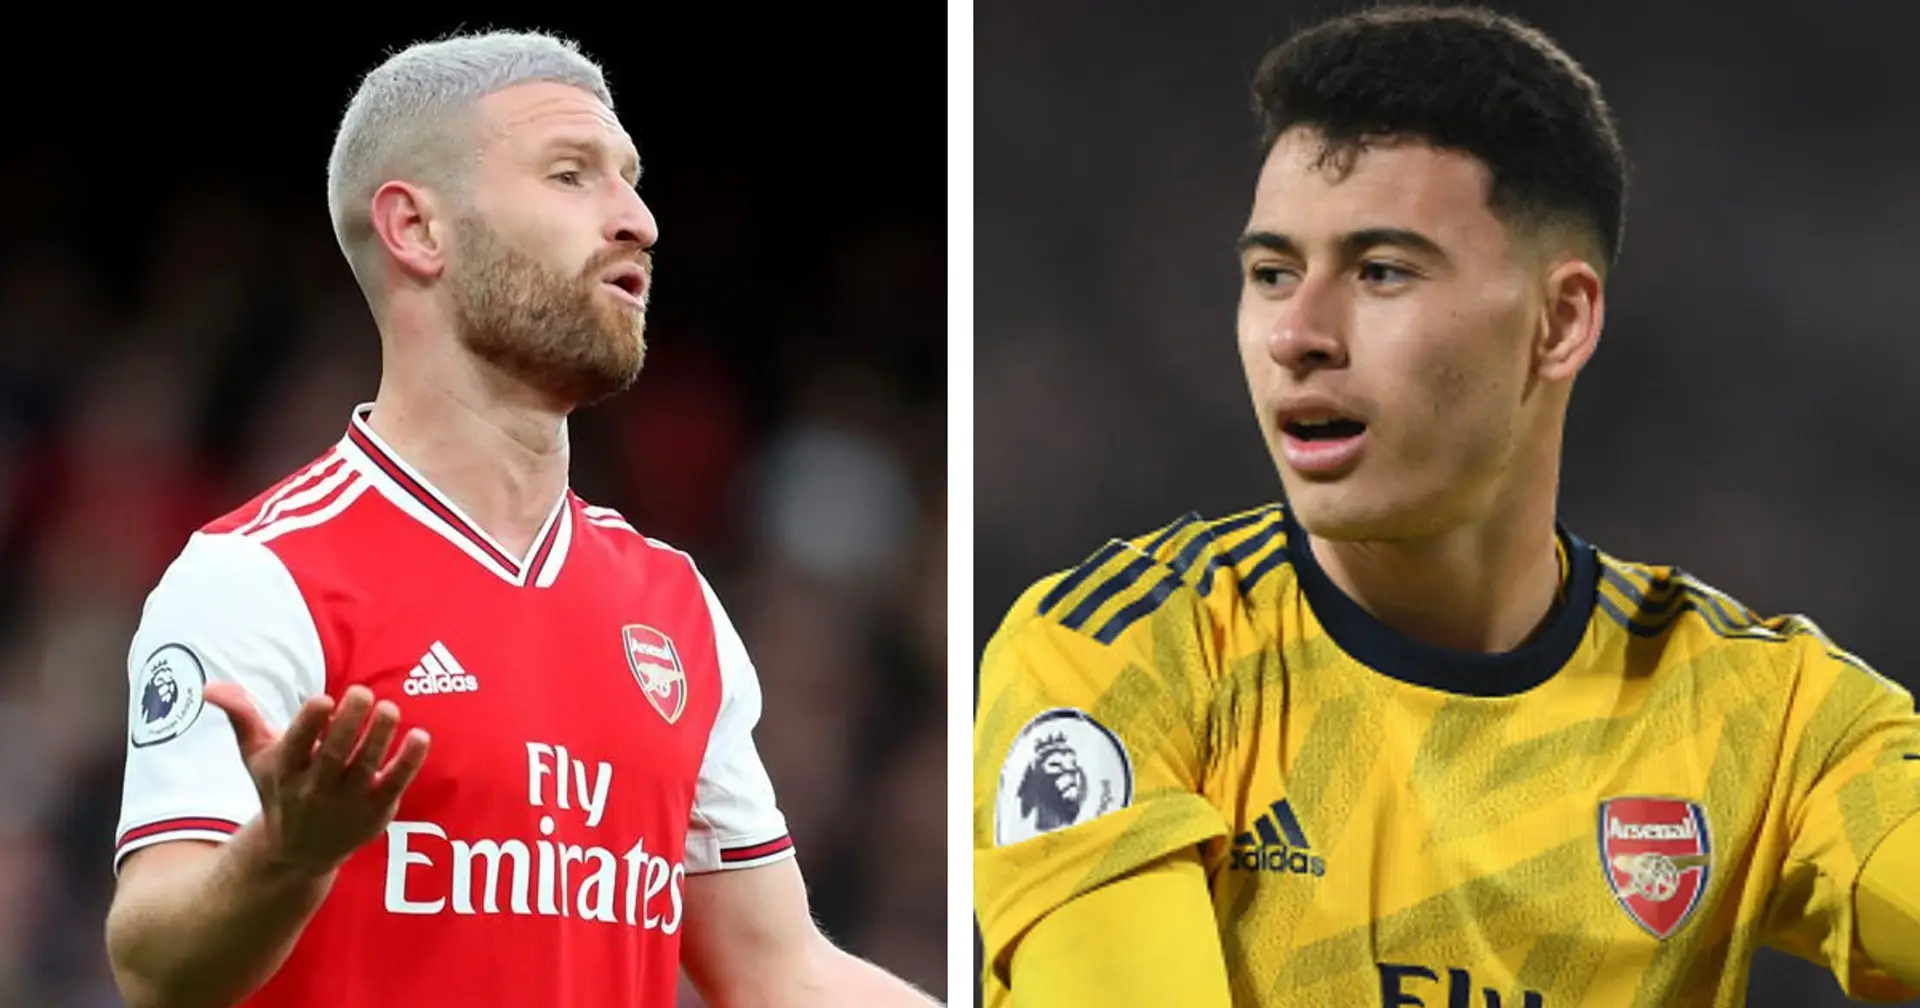 Arsenal provide medical update on Martinelli, Mustafi & 4 other players